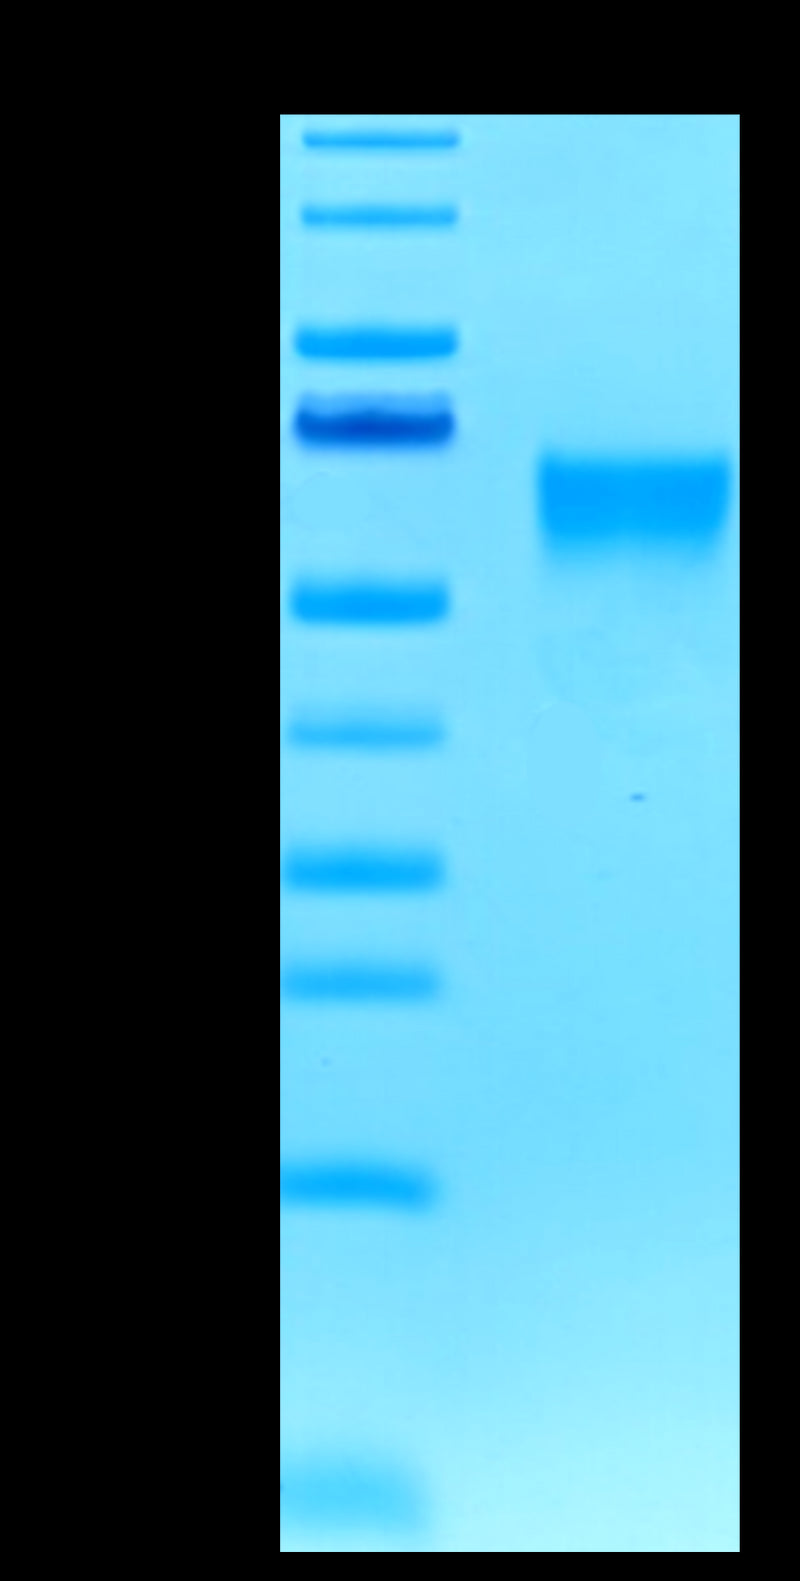 Biotinylated Human B7-H4 on Tris-Bis PAGE under reduced condition. The purity is greater than 95%.